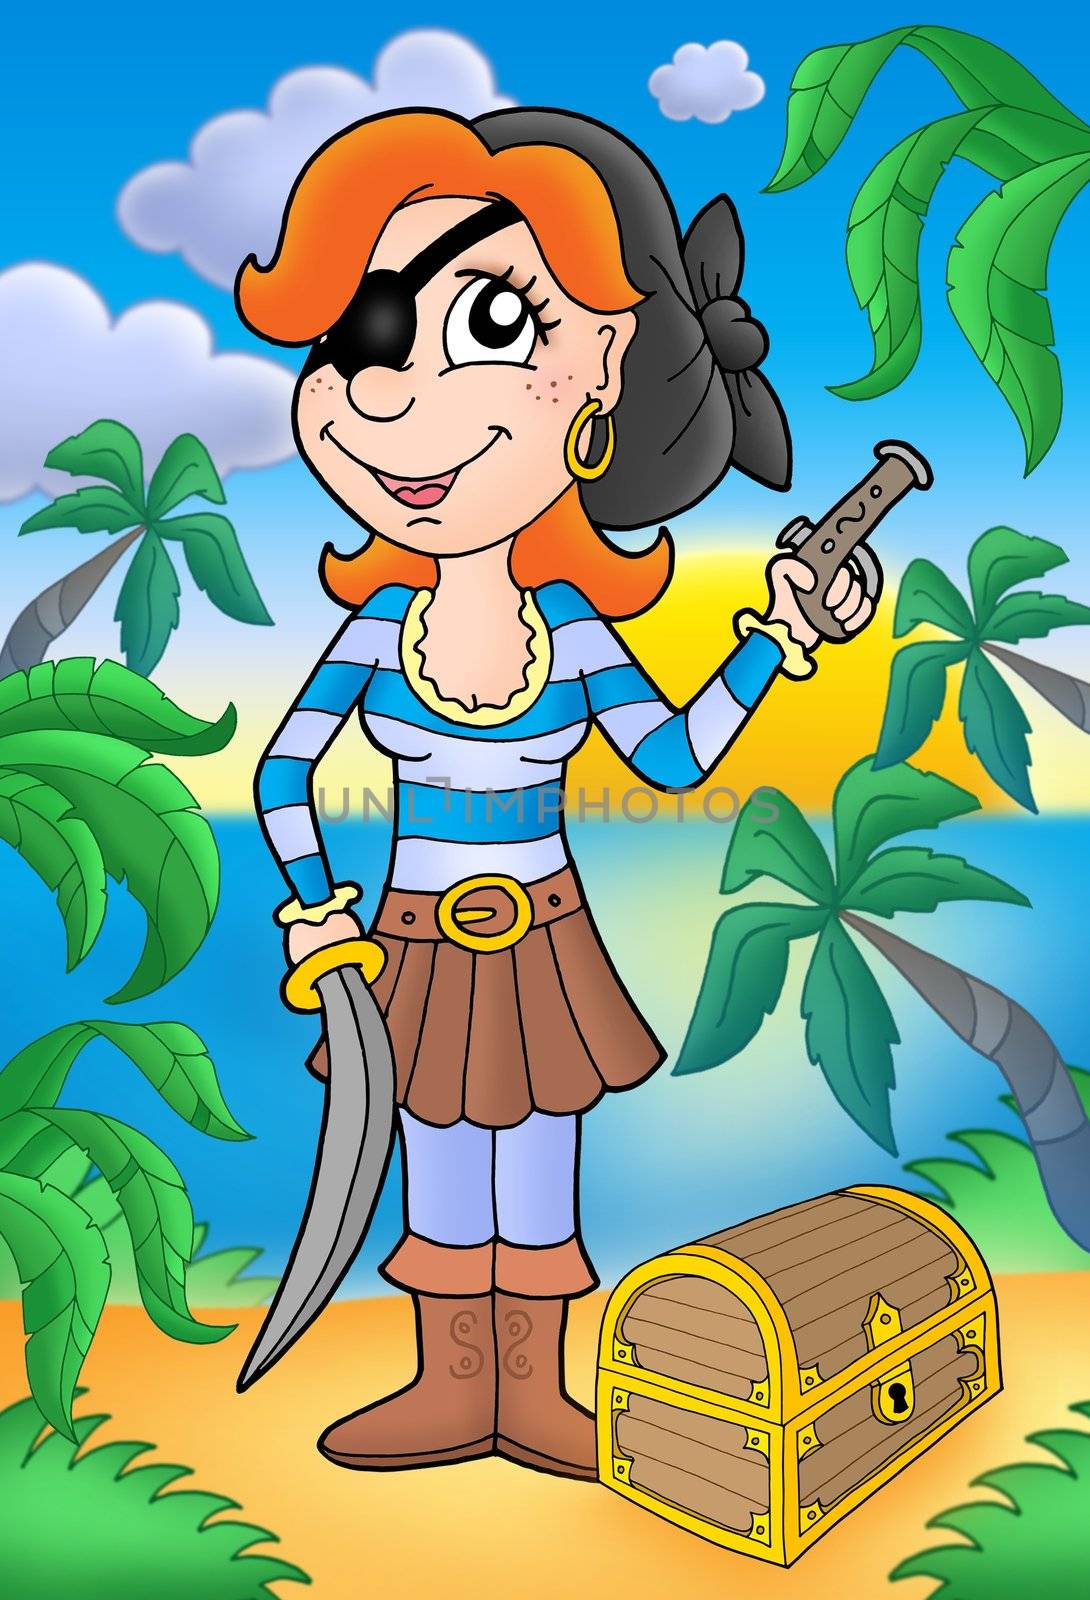 Pirate woman with pistol and treasure chest - color illustration.